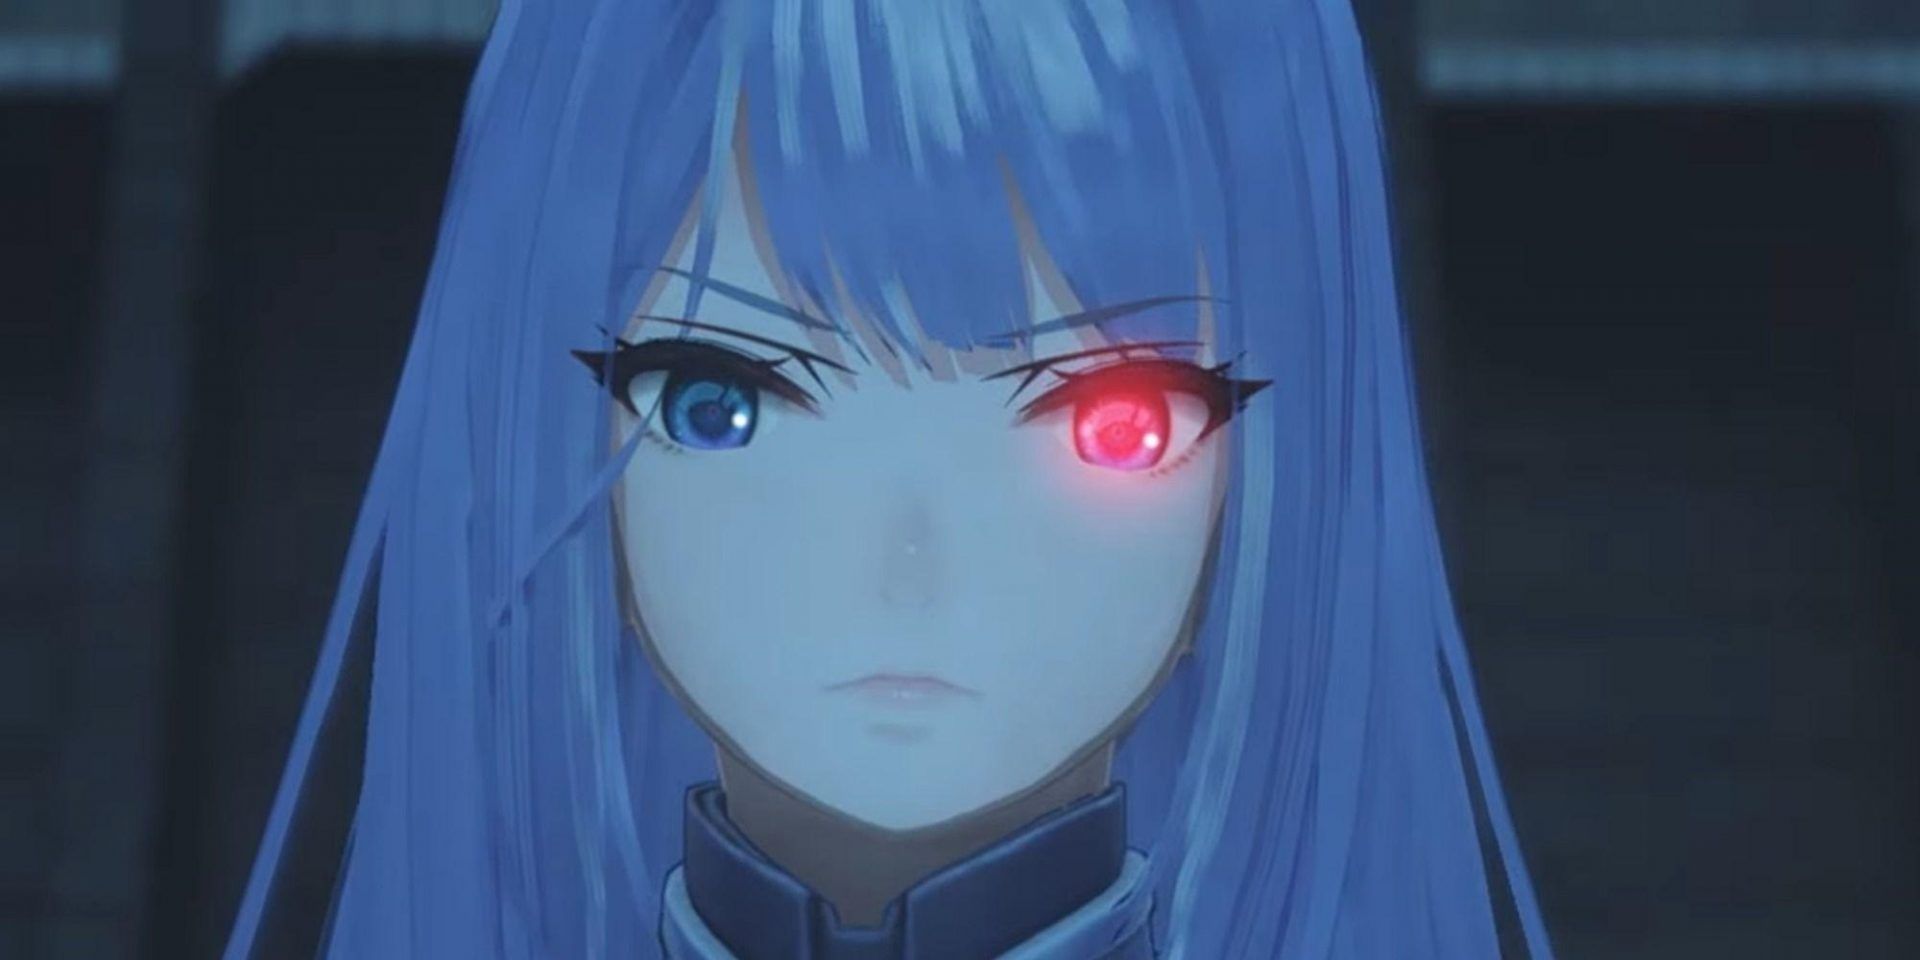 Xenoblade Chronicles 3 Close-Up of Character with Red Eye